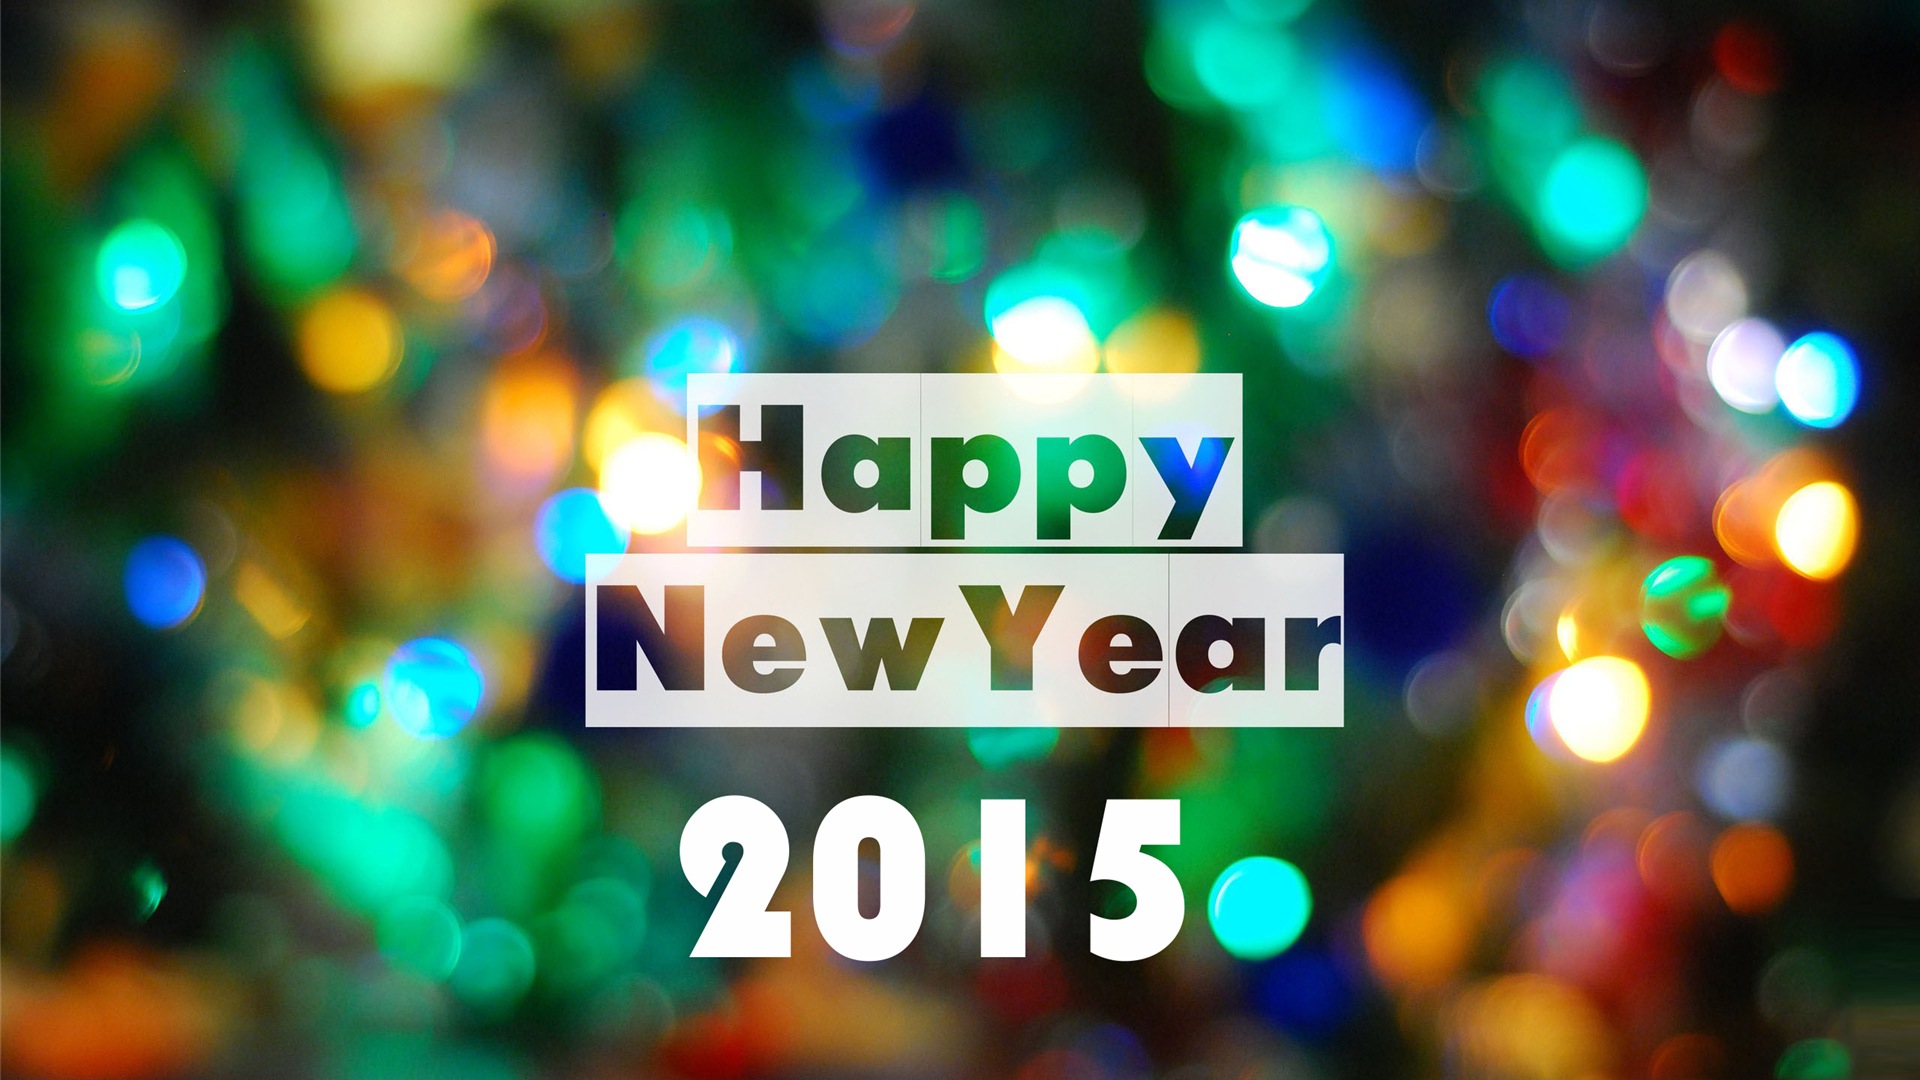 2015 New Year theme HD wallpapers (2) #14 - 1920x1080